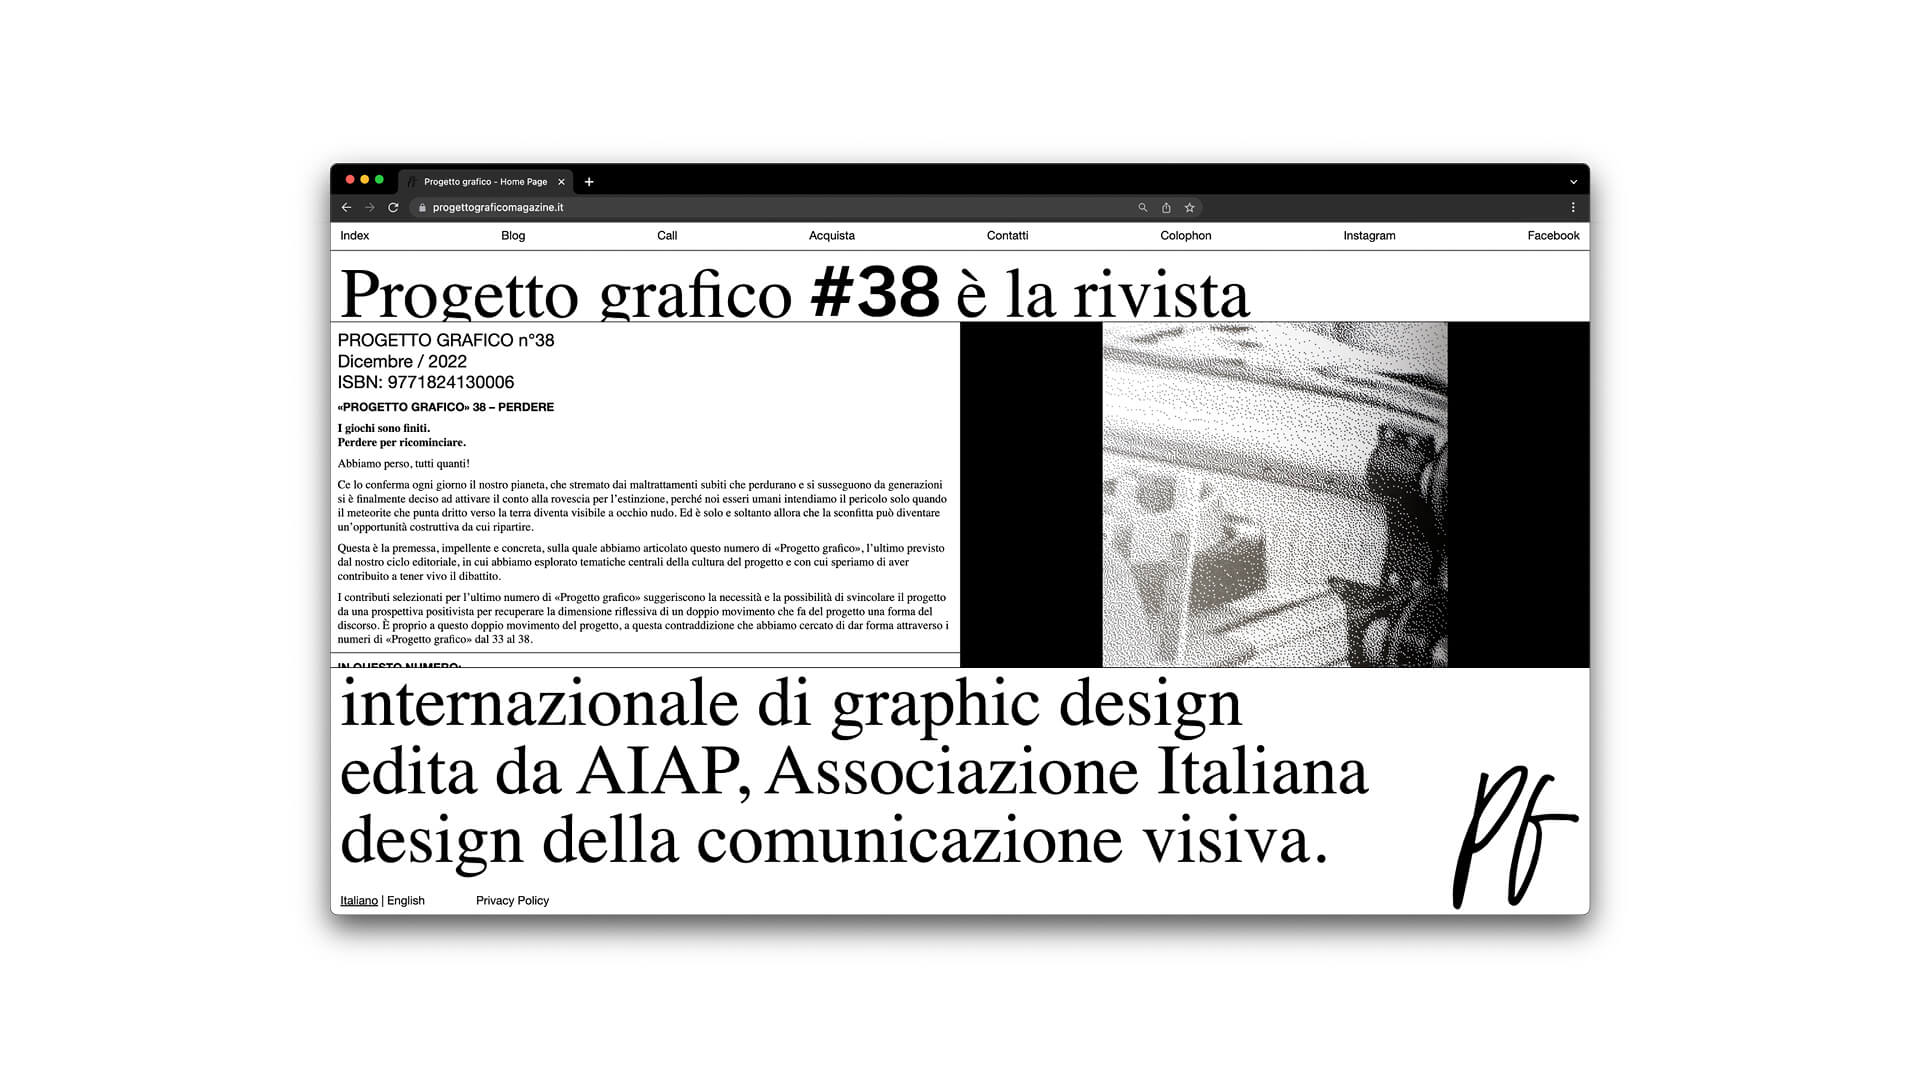 View of issue 38 of Progetto Grafico magazine in the website